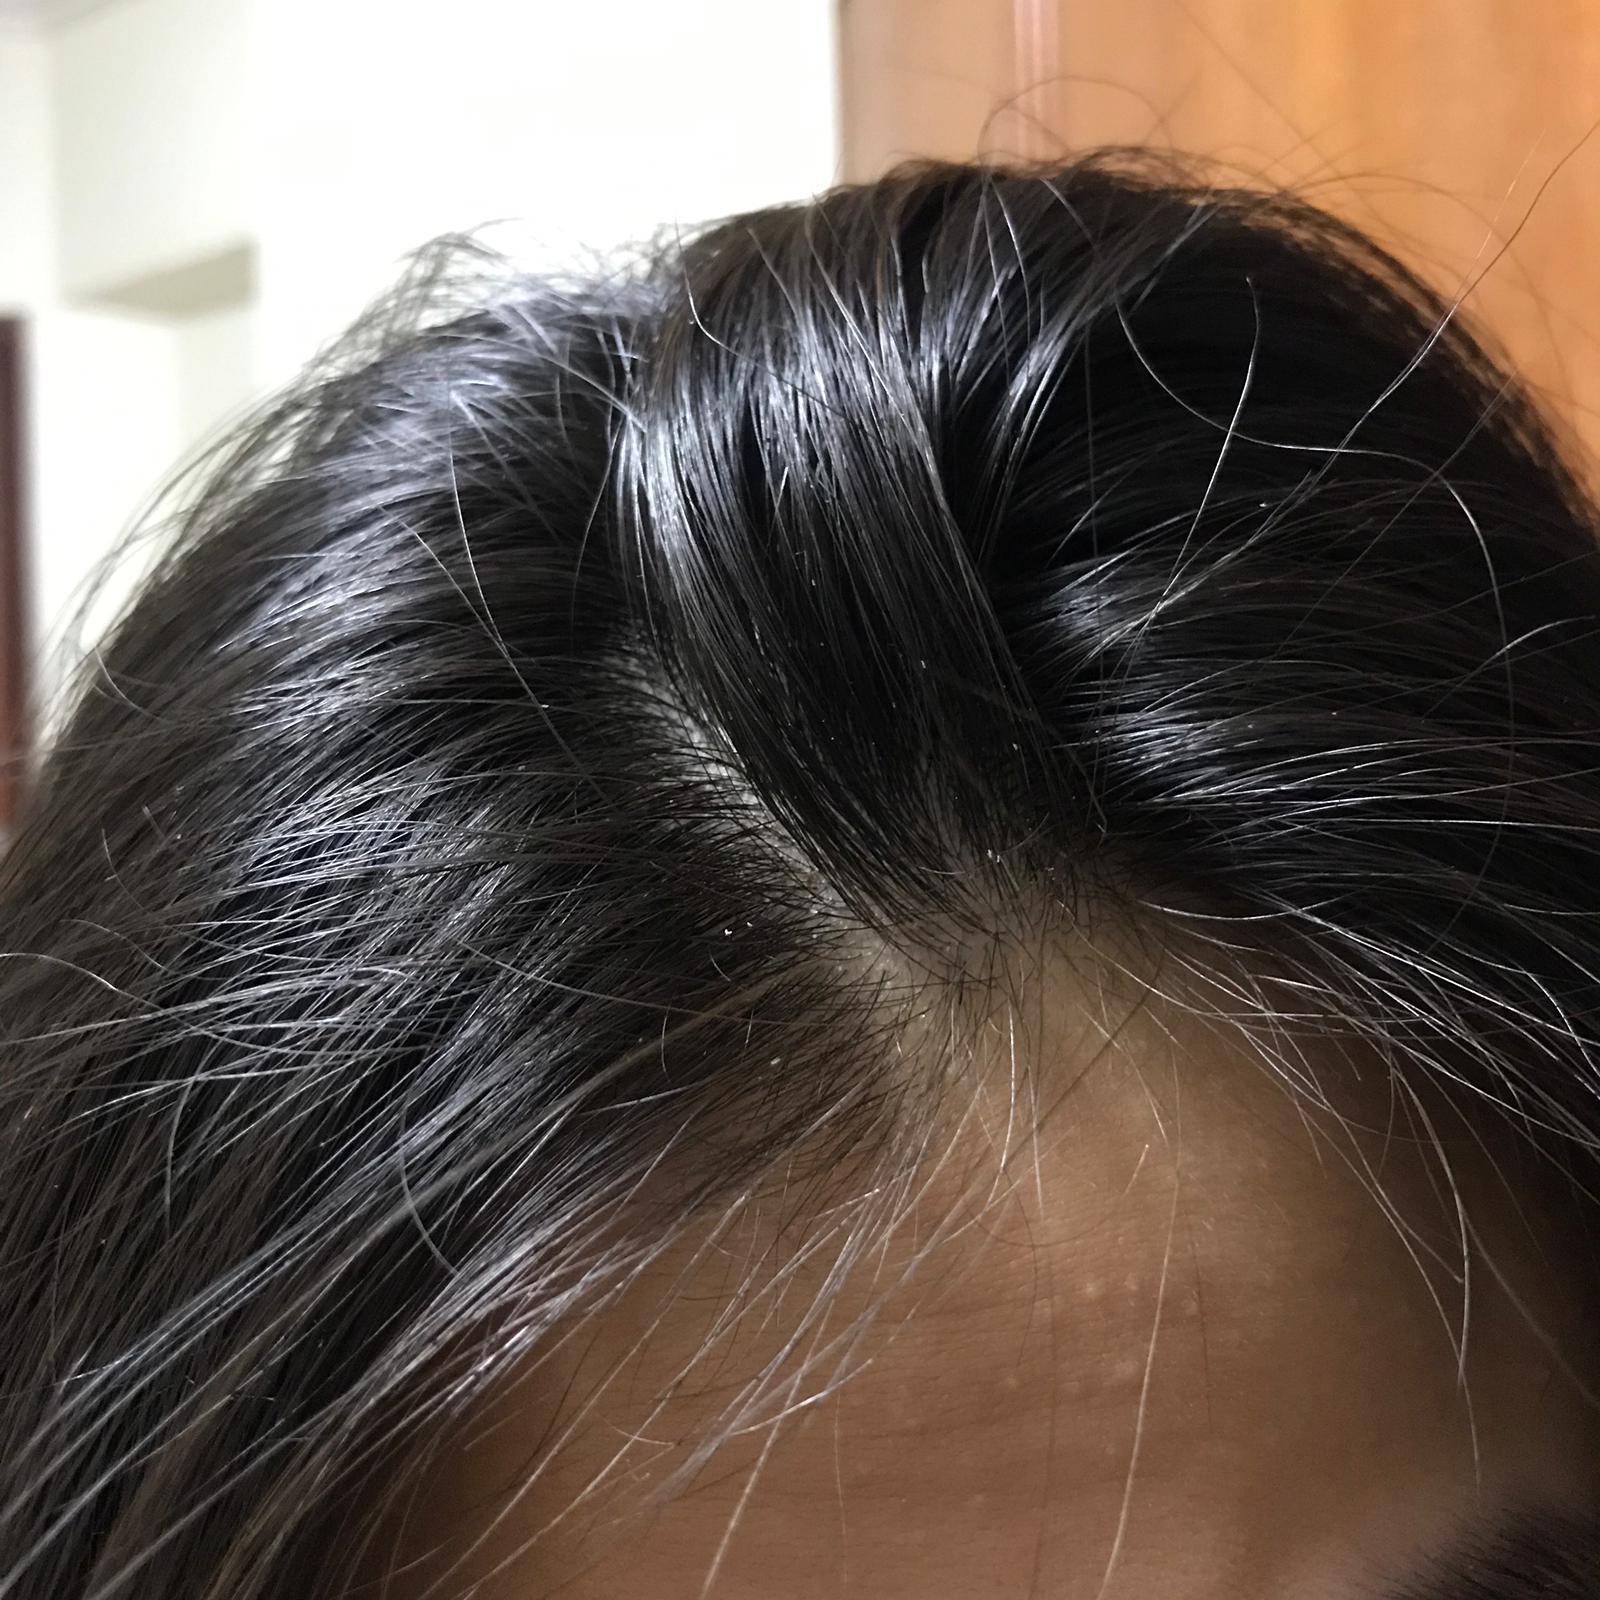 Dandruff or dry scalp? (Will write in more details below ...